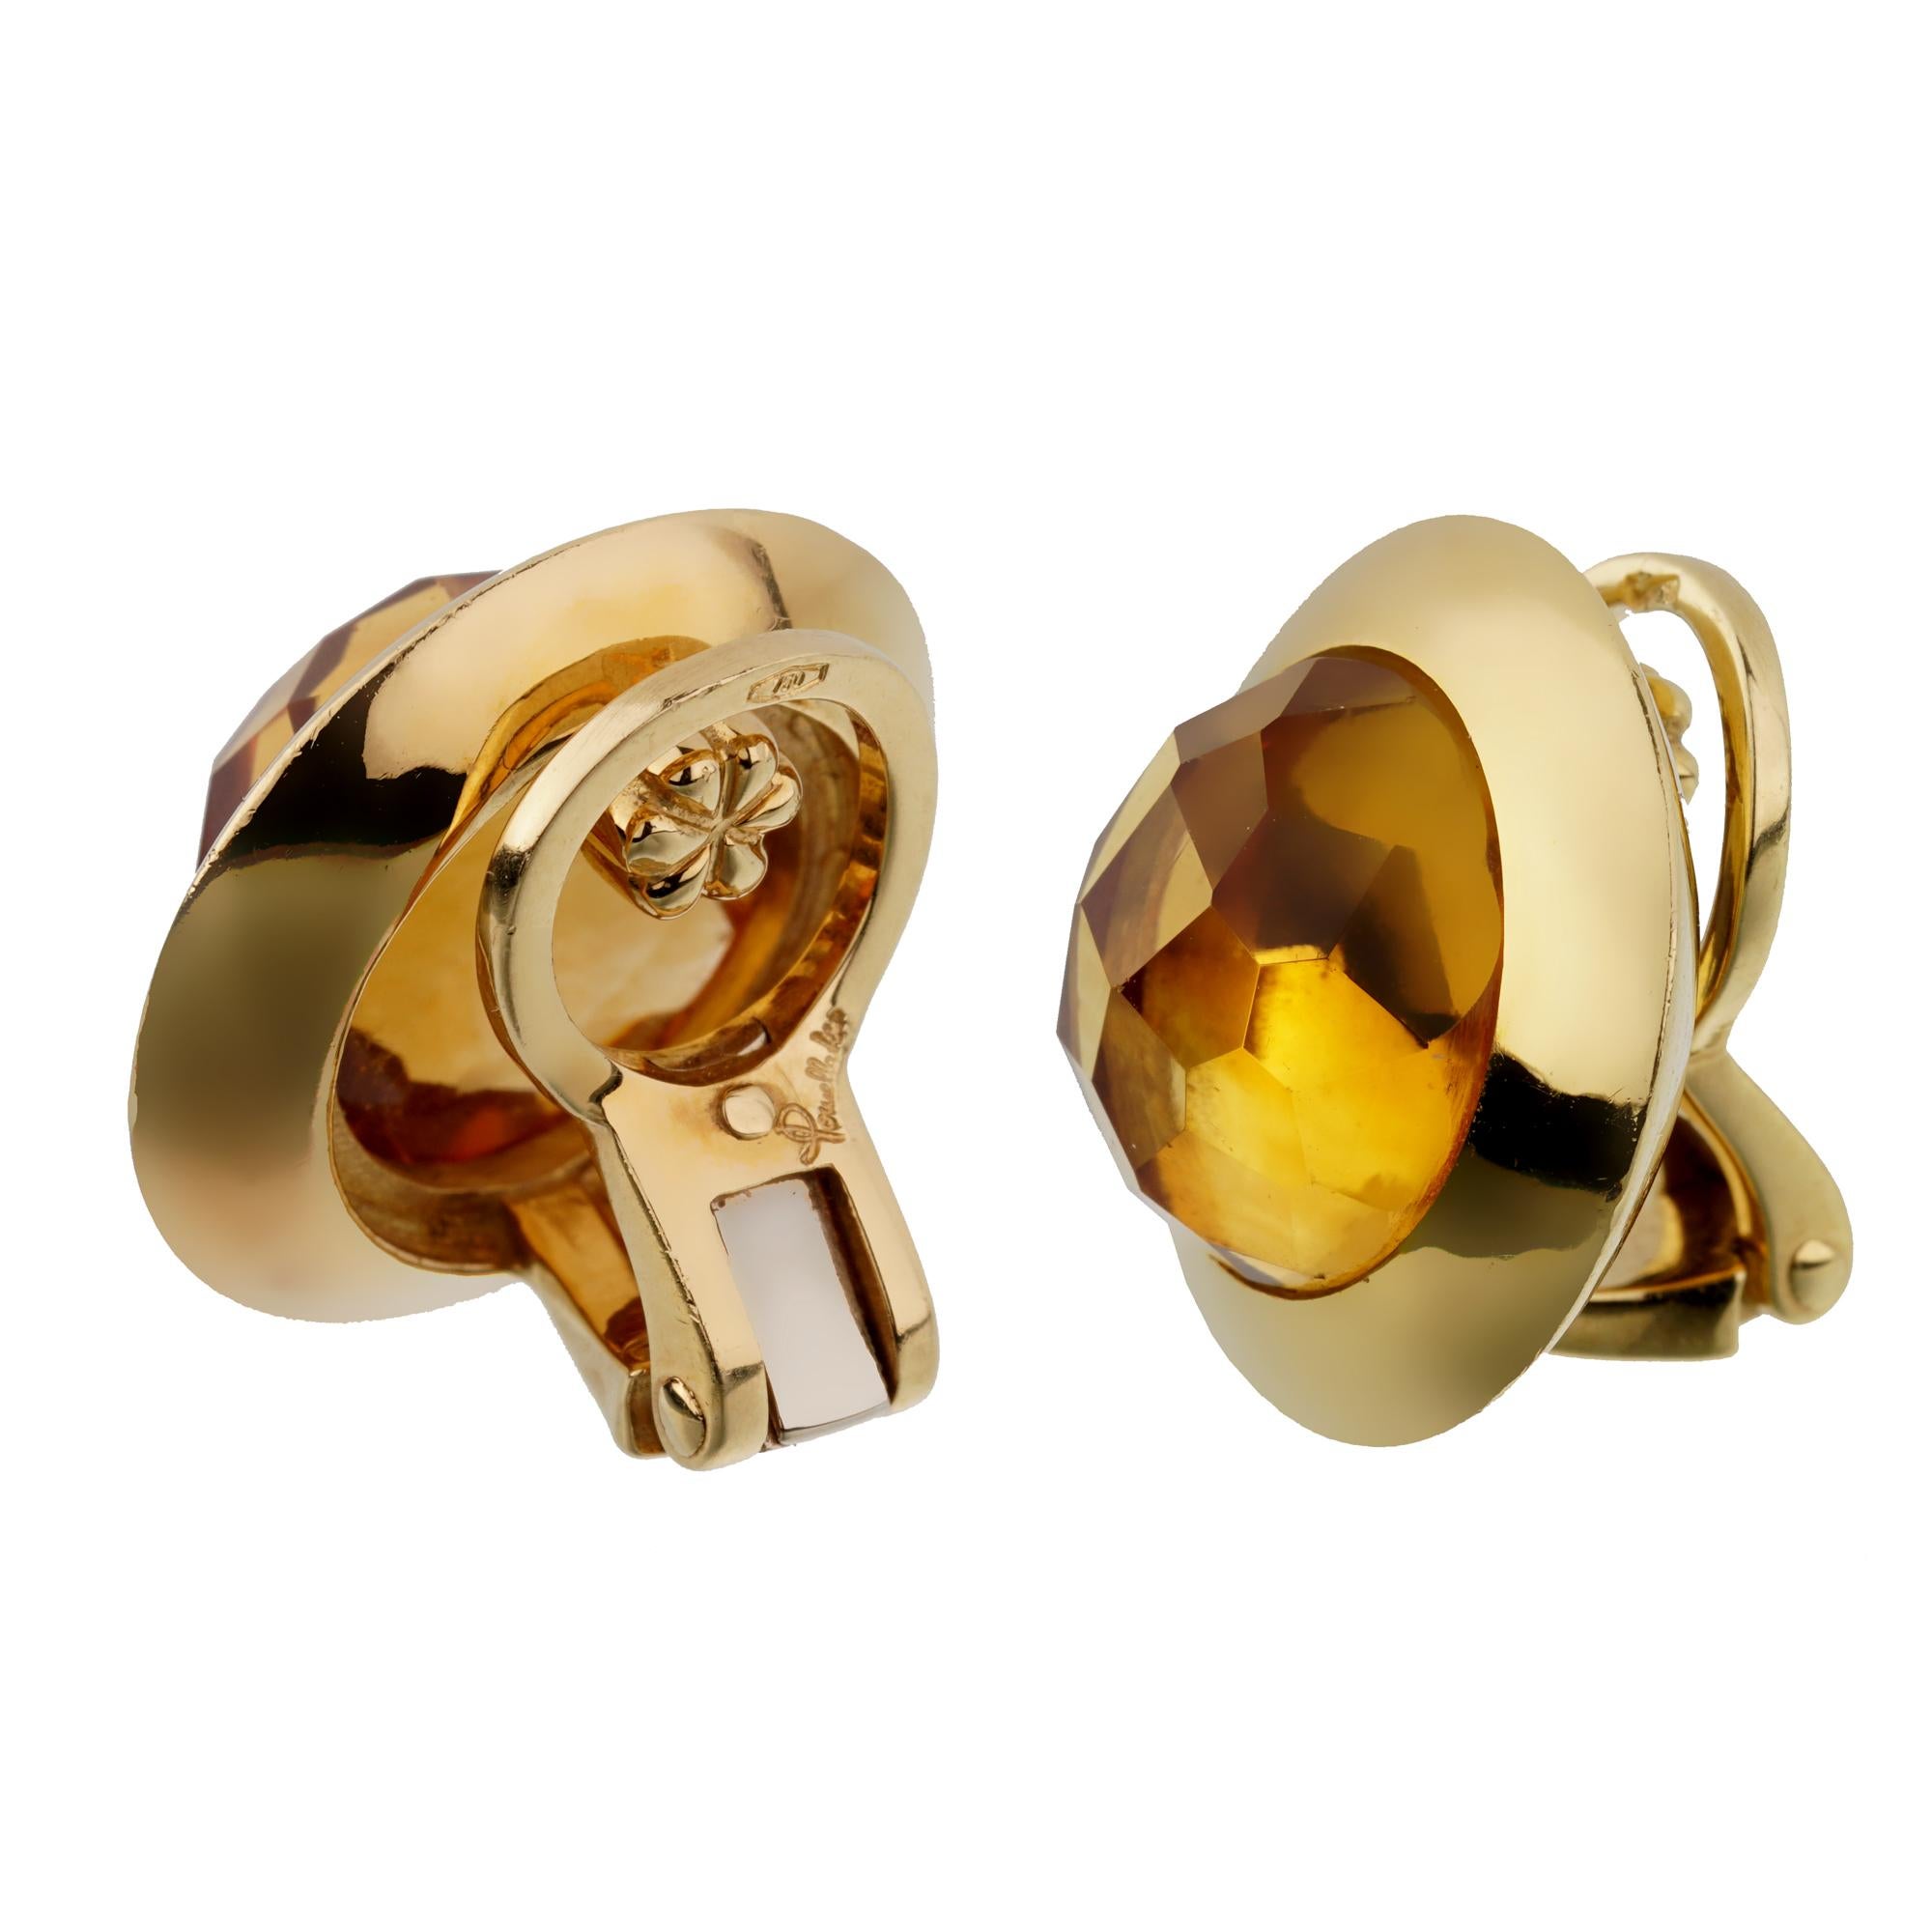 Pomellato 18ct Citrine Yellow Gold Clip On Earrings In Excellent Condition For Sale In Feasterville, PA